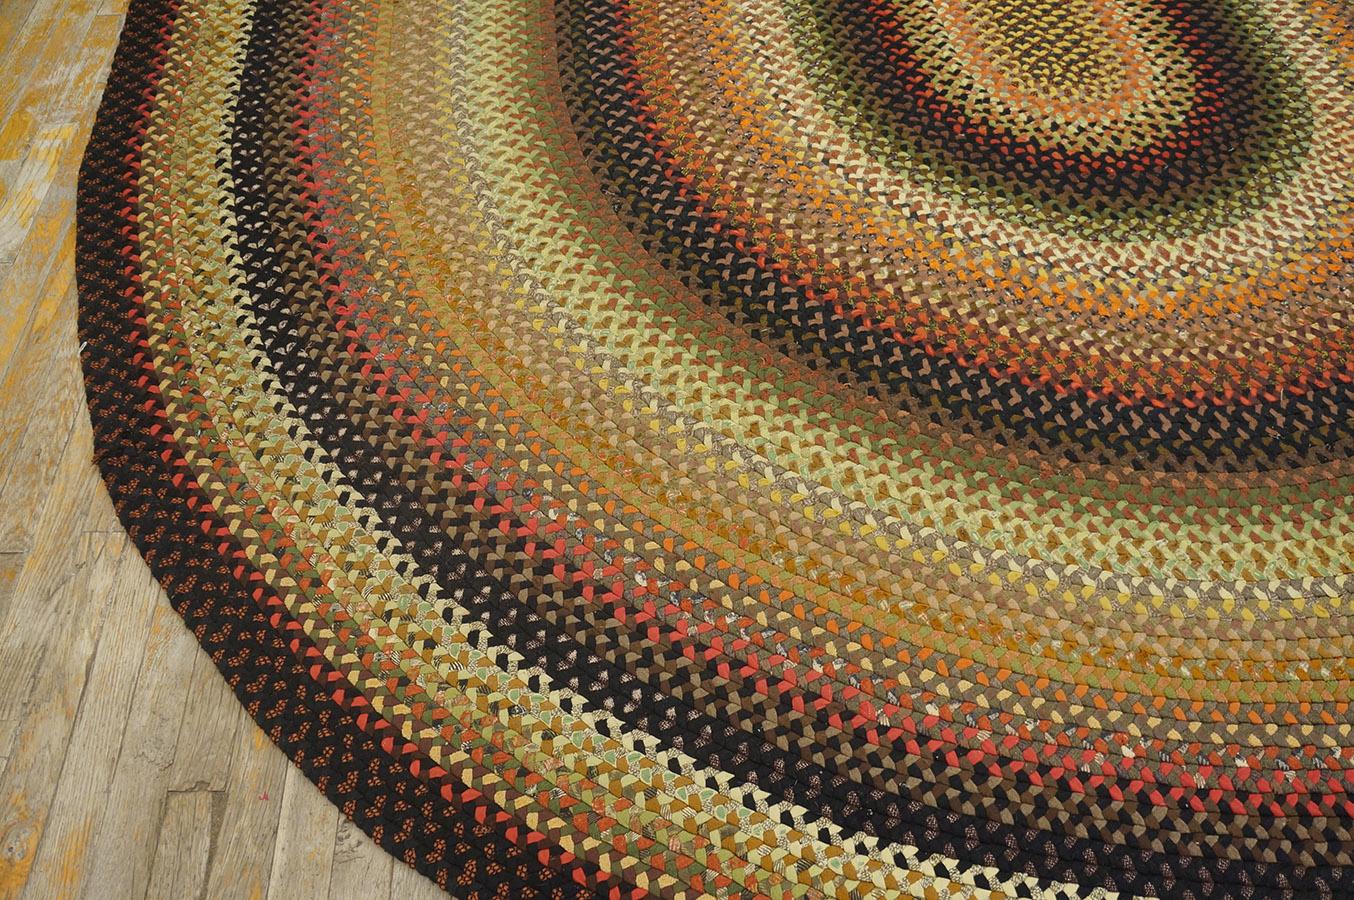 Hand-Woven 1930s American Braided Rug ( 9'10